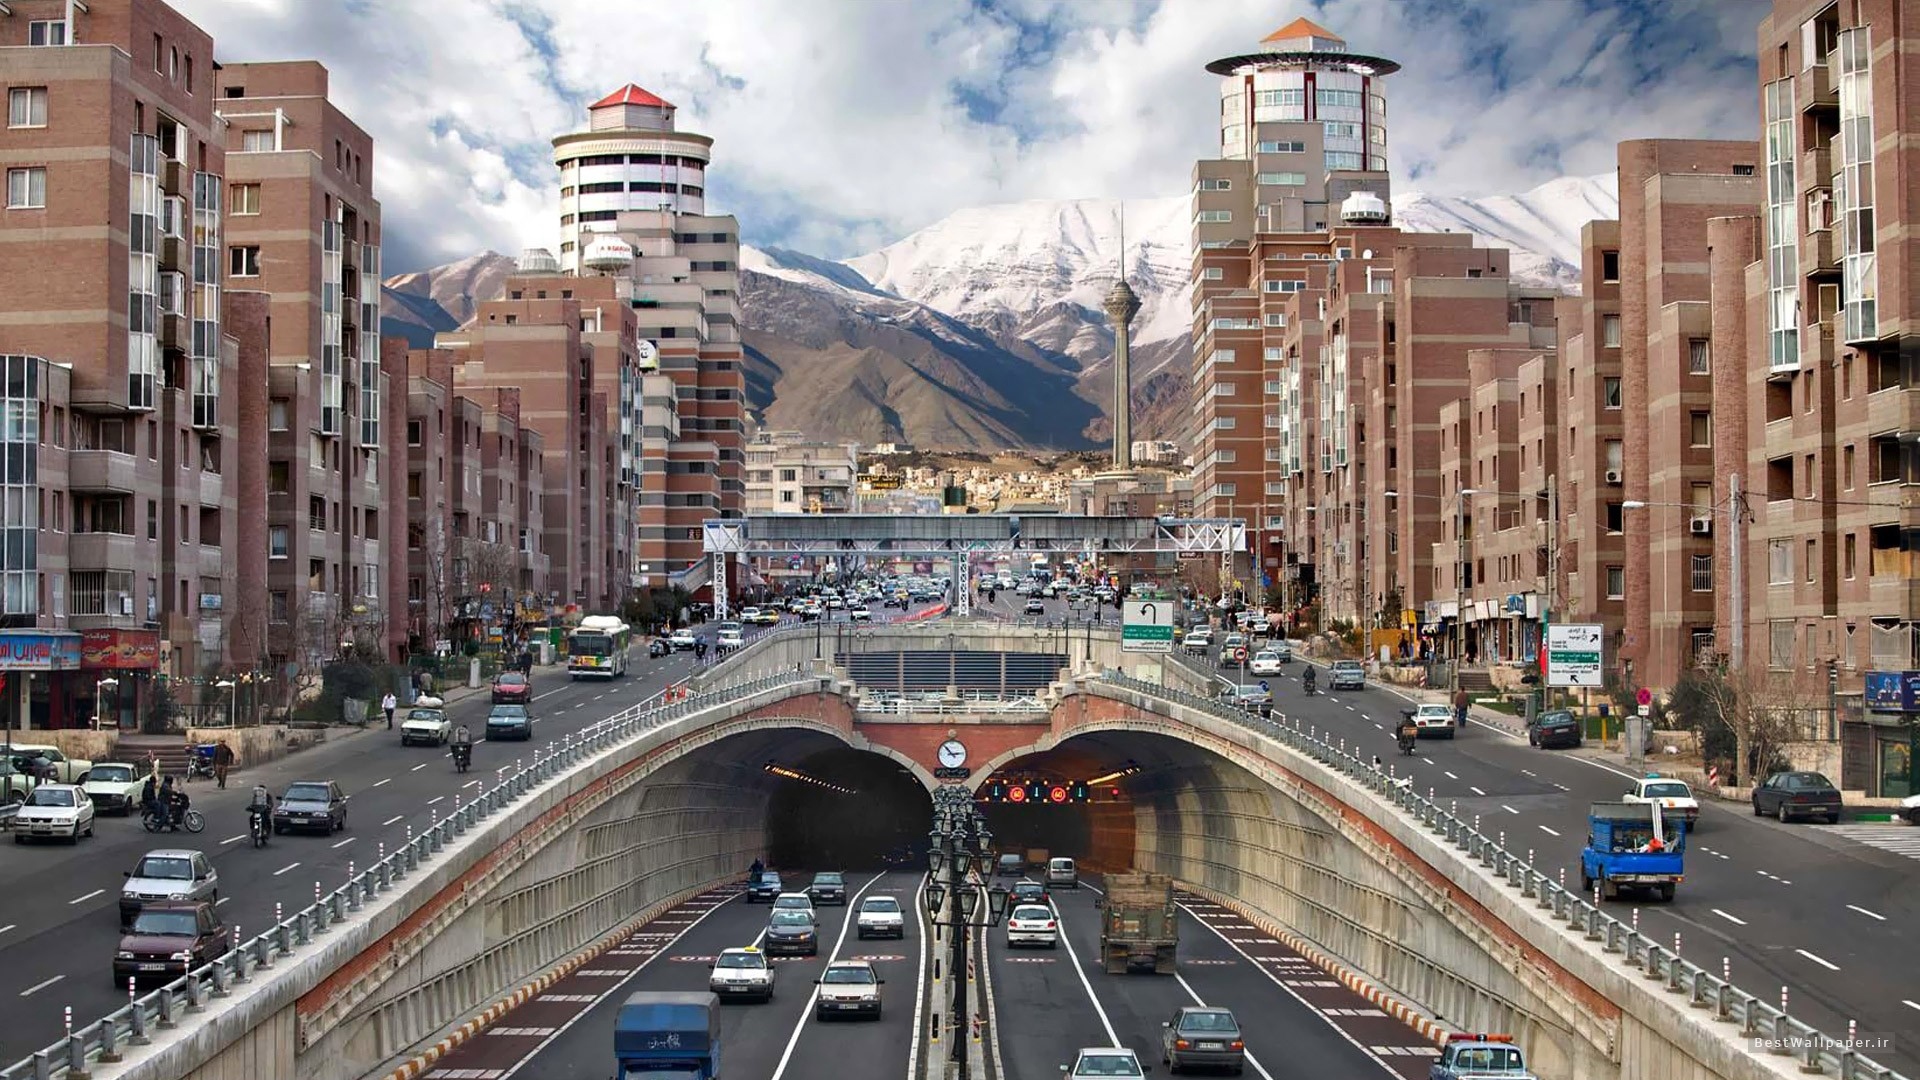 These 10 reasons will convince you to visit Tehran